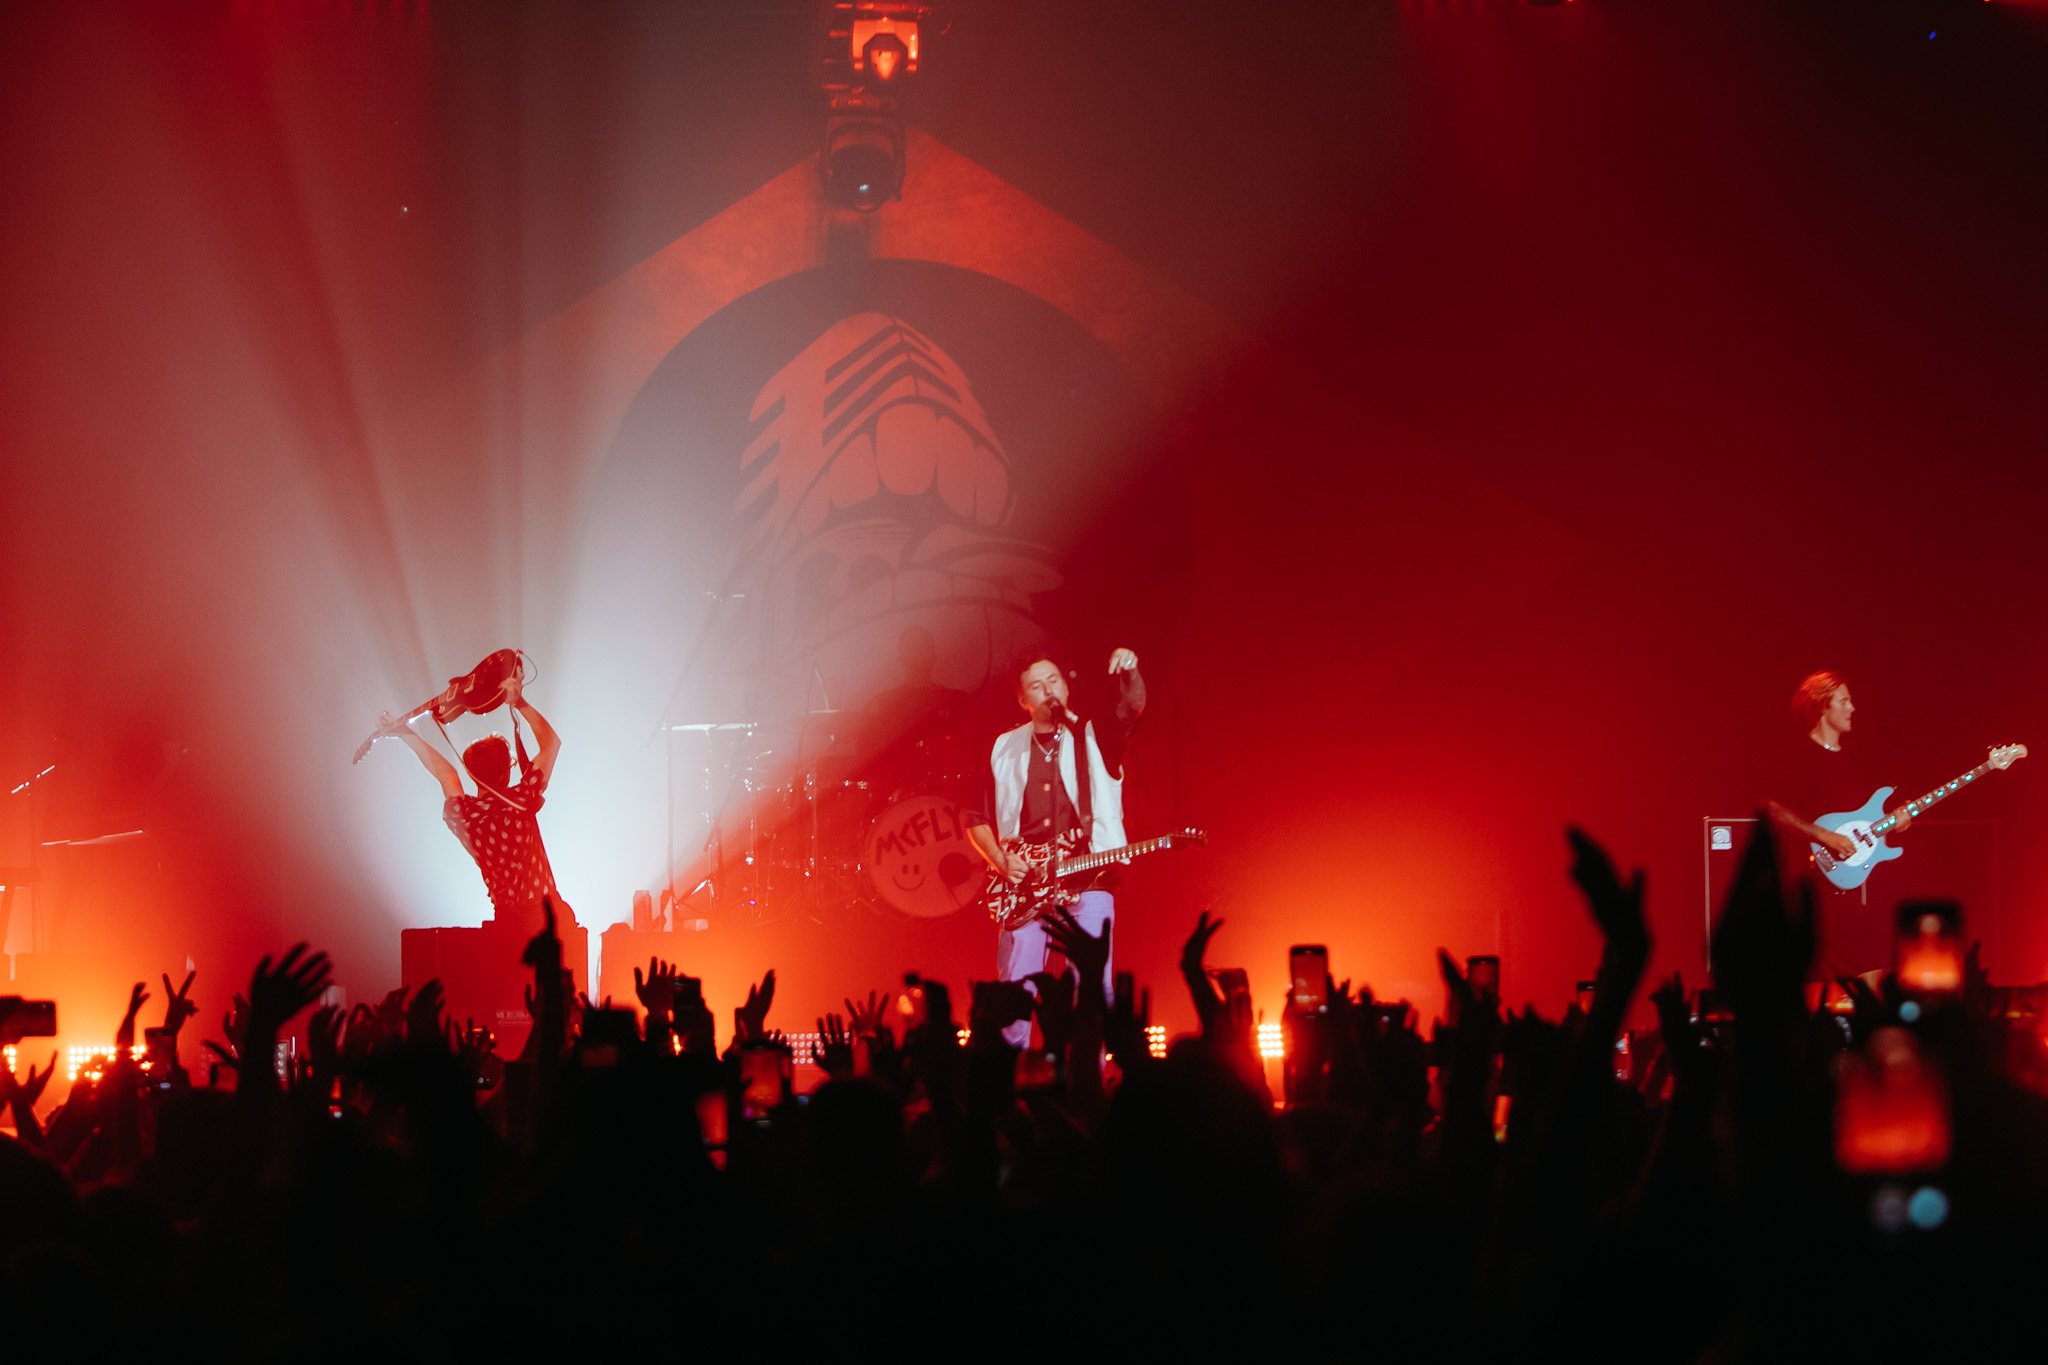 McFly on display in Sao Paulo.  The picture shows the audience, red lights and band members in the background